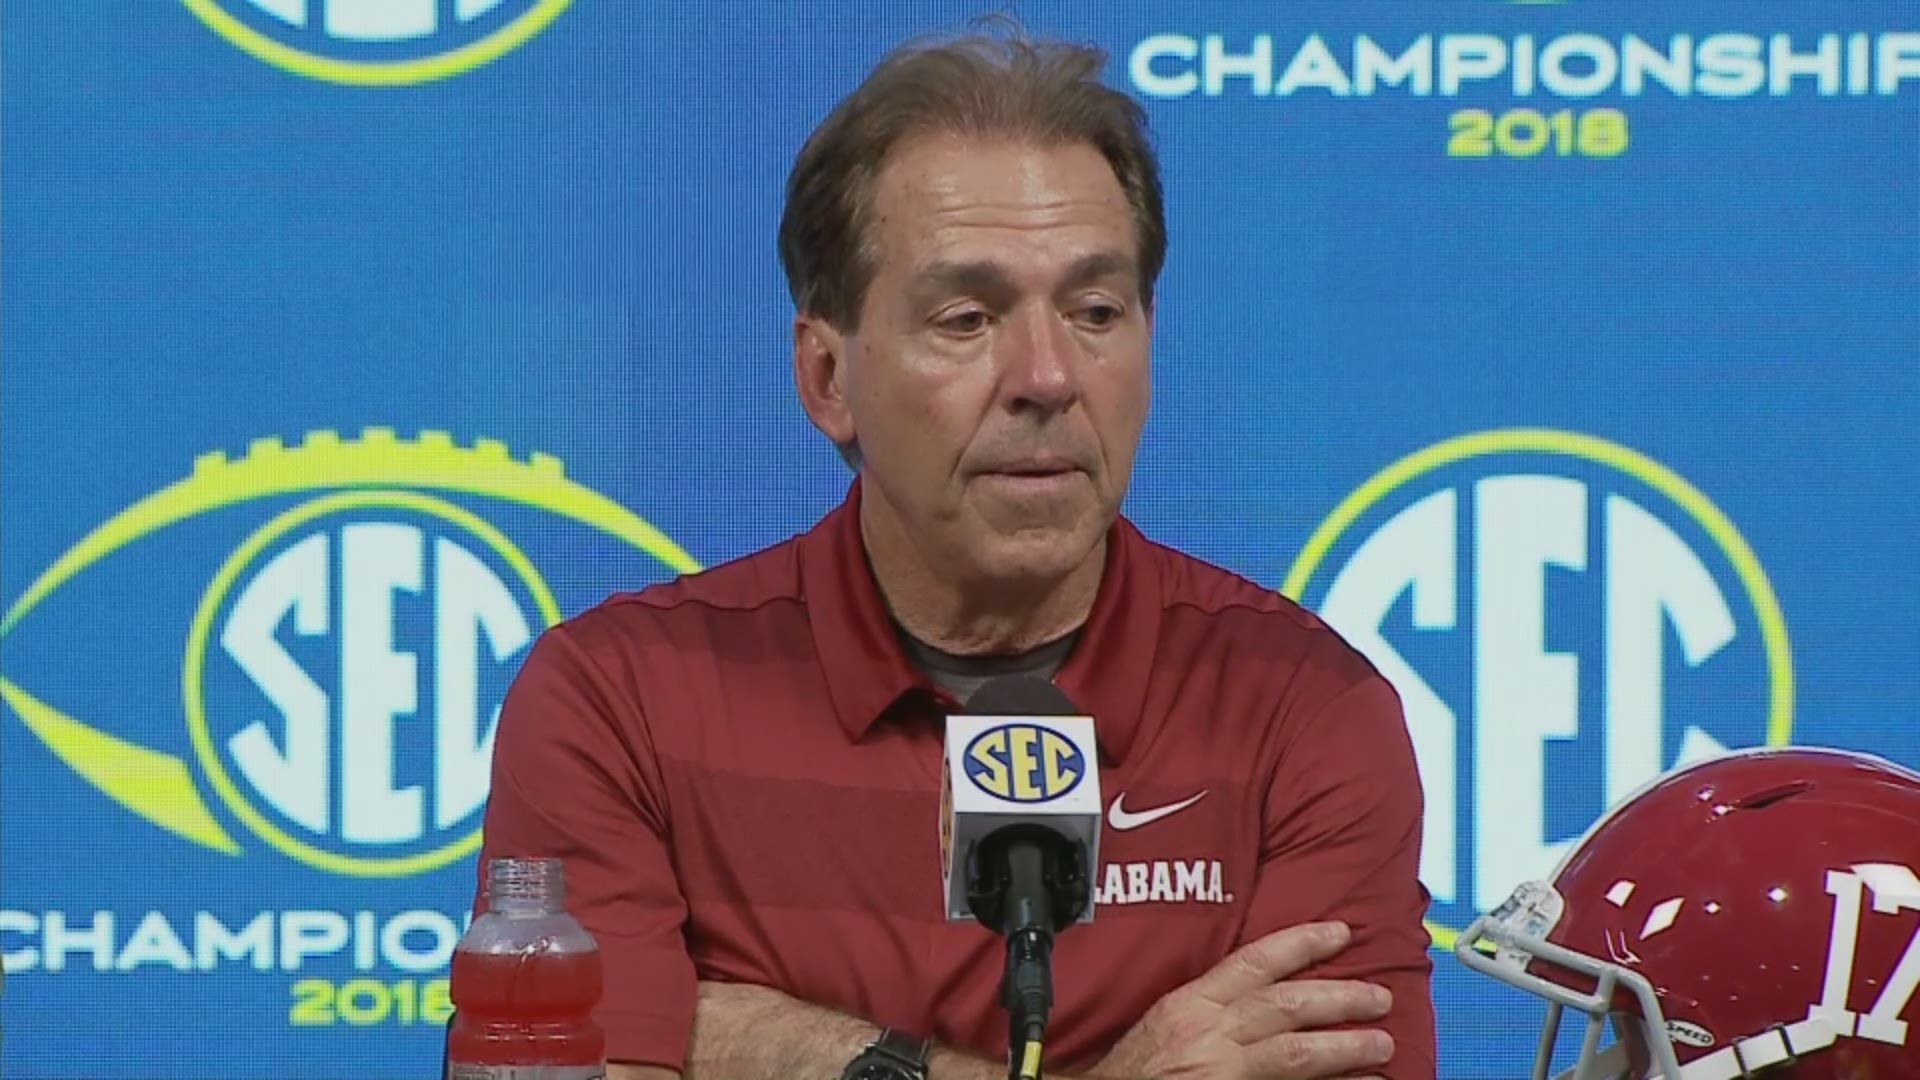 The Alabama coach gave the ultimate compliment to UGA in the postgame session, saying he wouldn't want to face the Dawgs again.